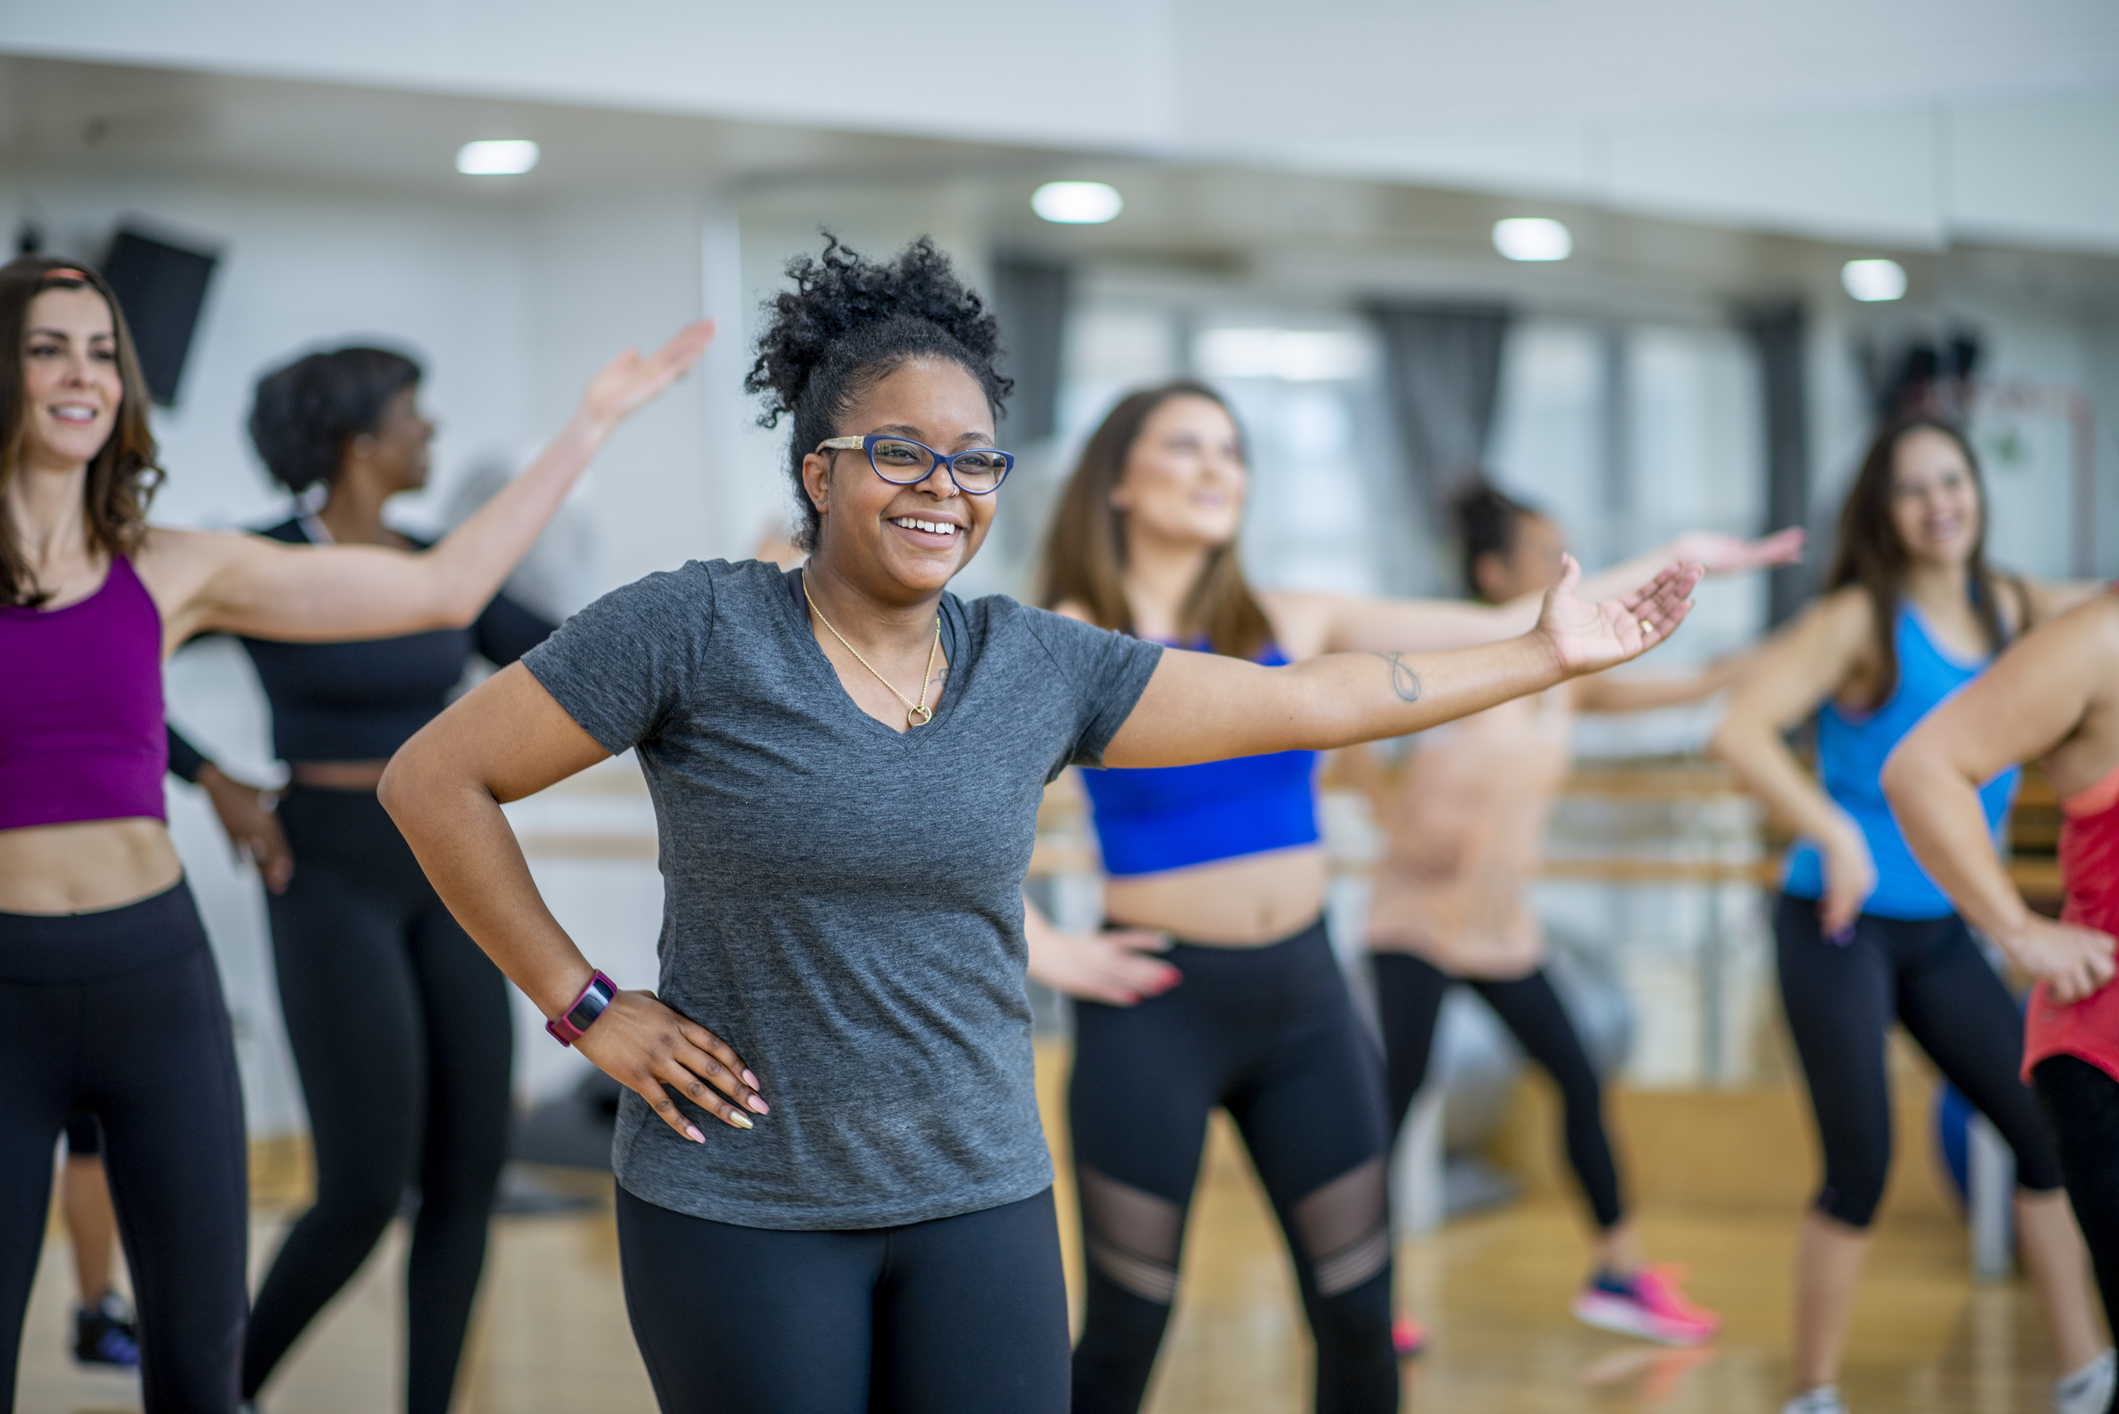 Group fitness class participants, including smiling woman in gray shirt and glasses, engage in an energetic workout session in a gym studio